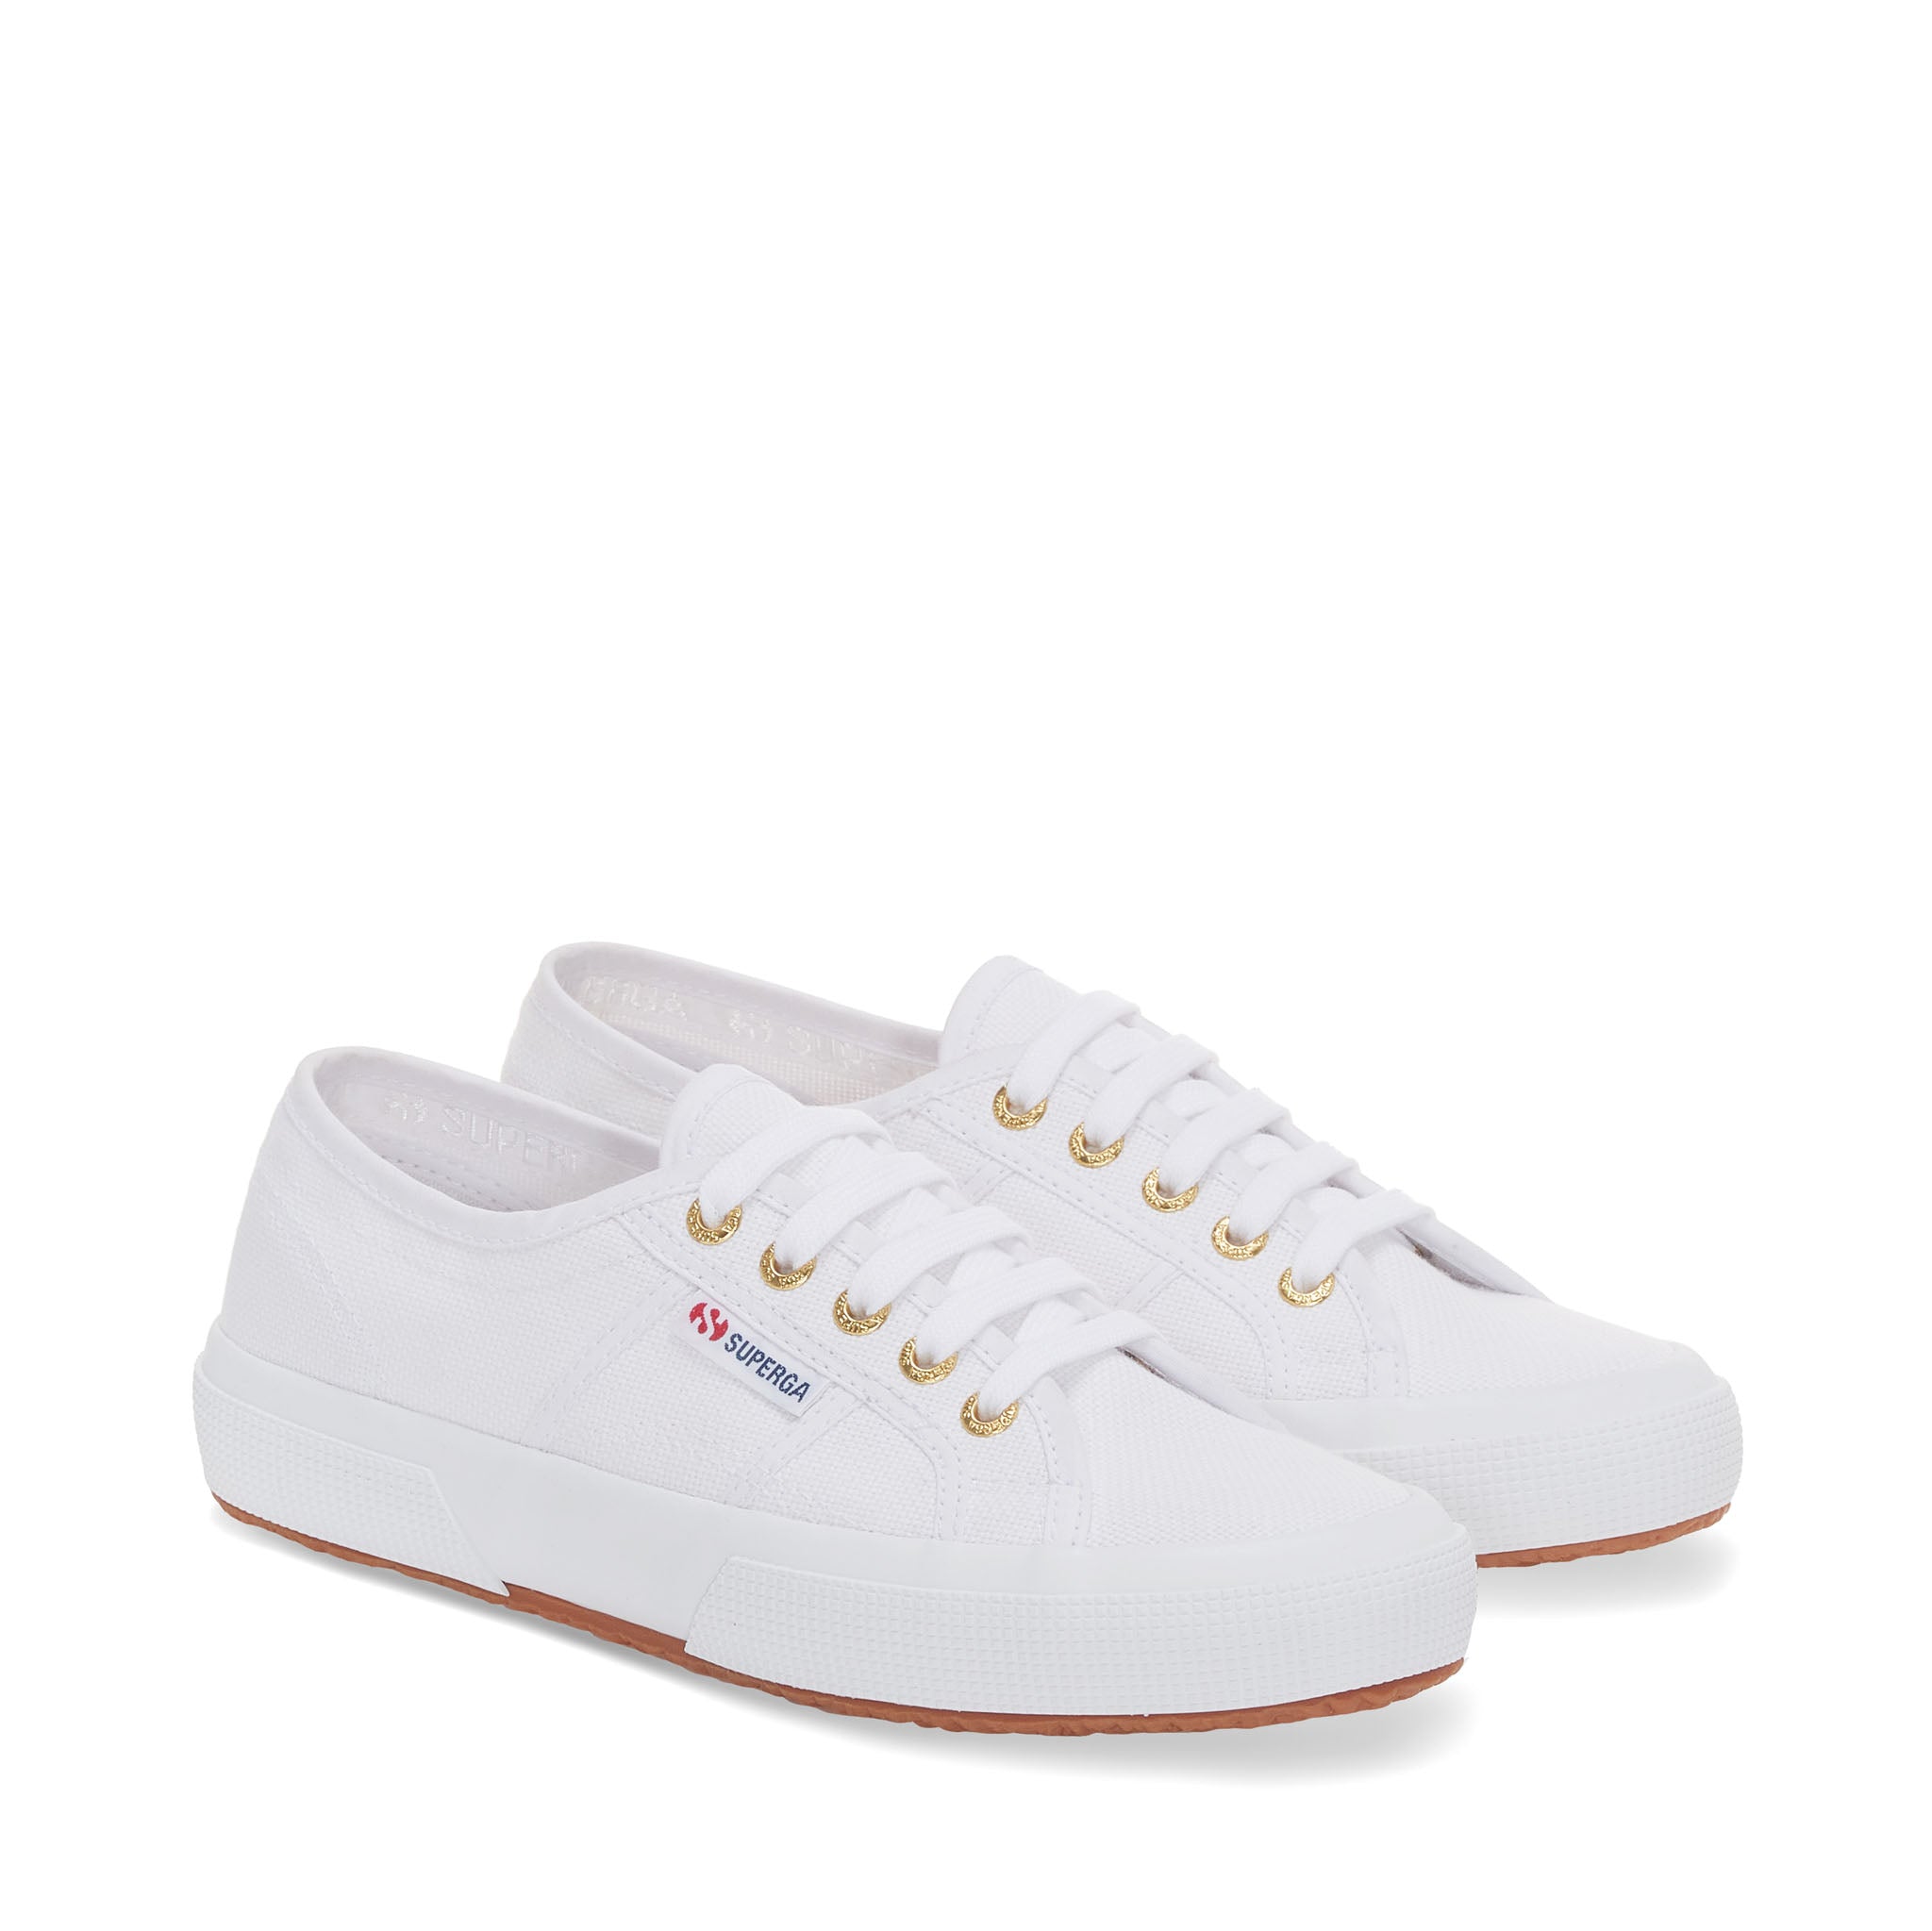 Superga 2790 Tank flatform sneakers with gold eyelets in white canvas | ASOS